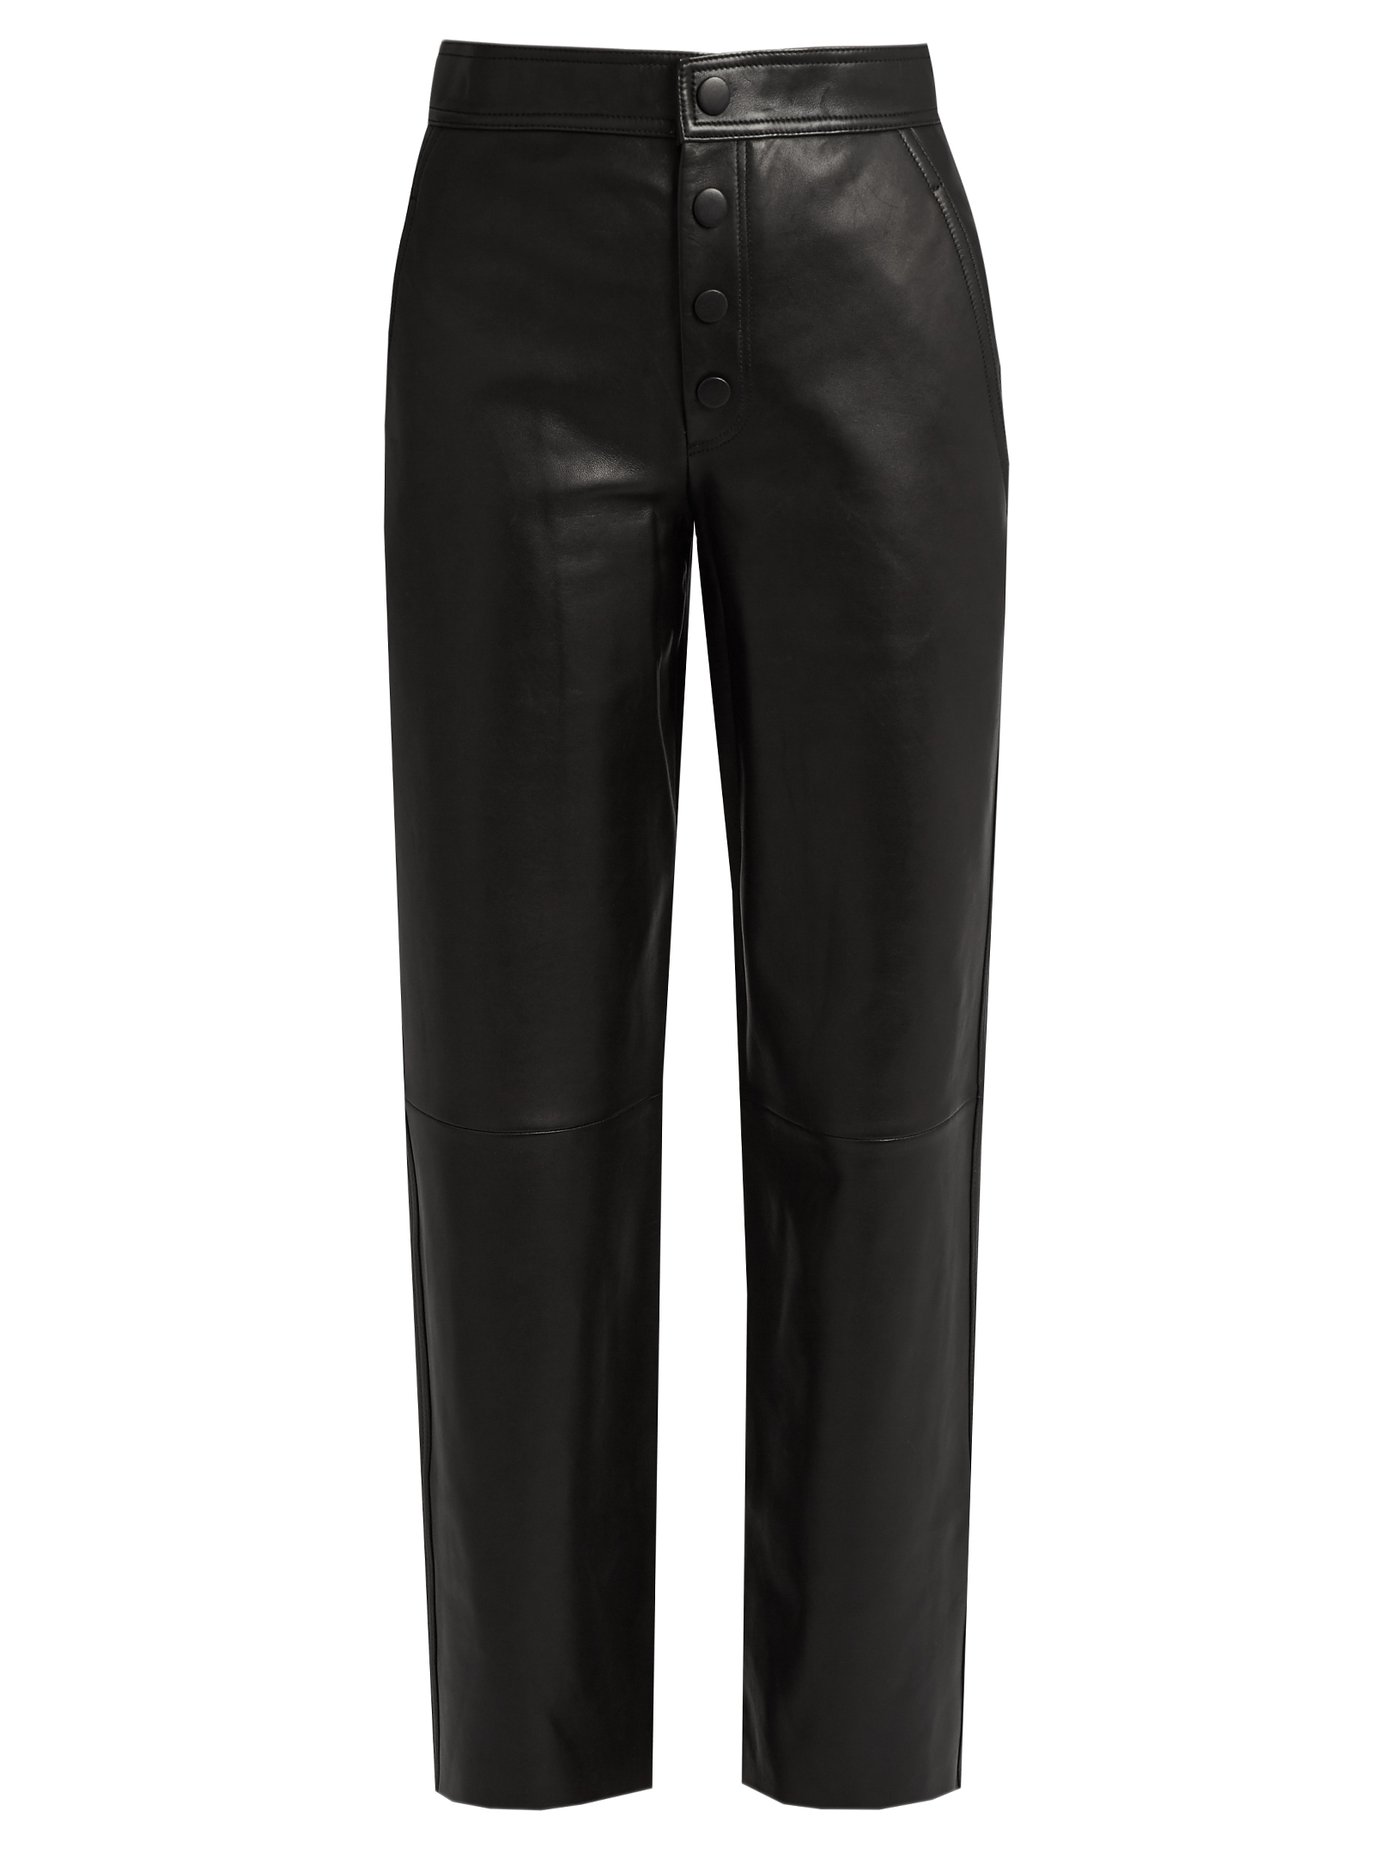 leather trousers uk